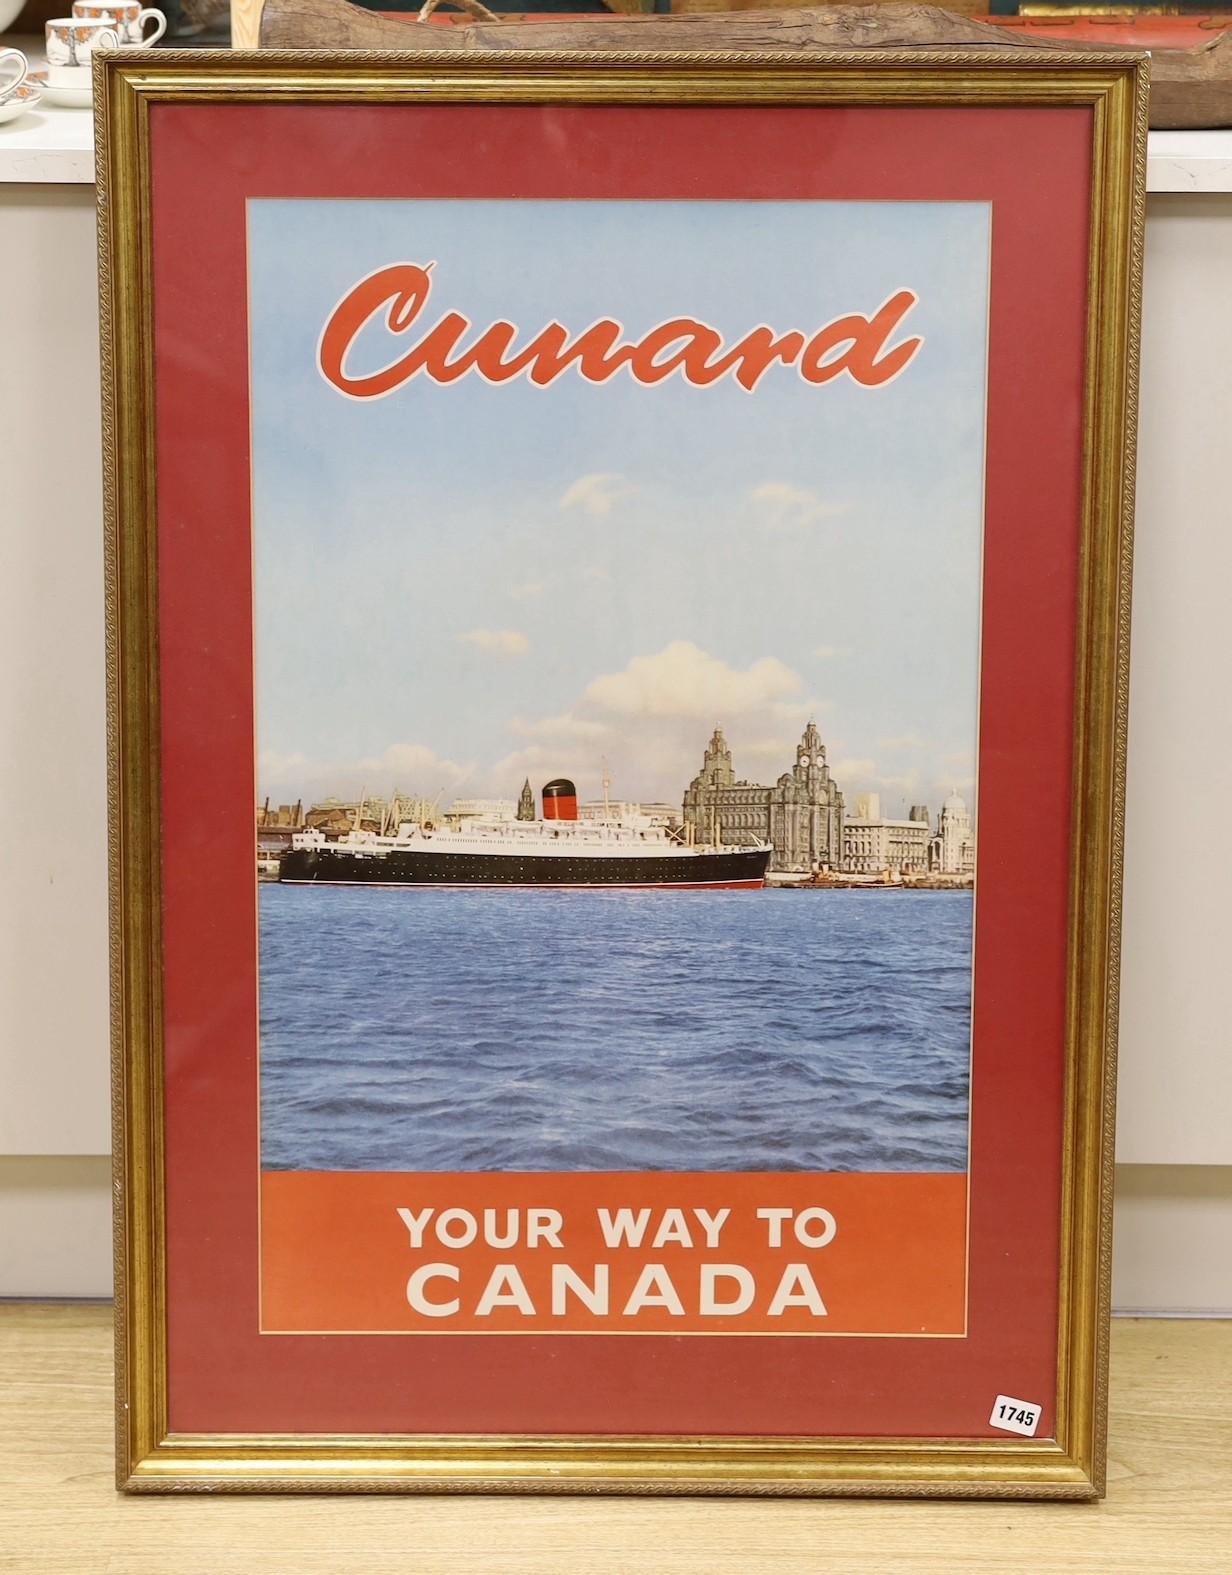 Cunard poster of Liverpool - “Your Way to Canada”, 77 x 48cm